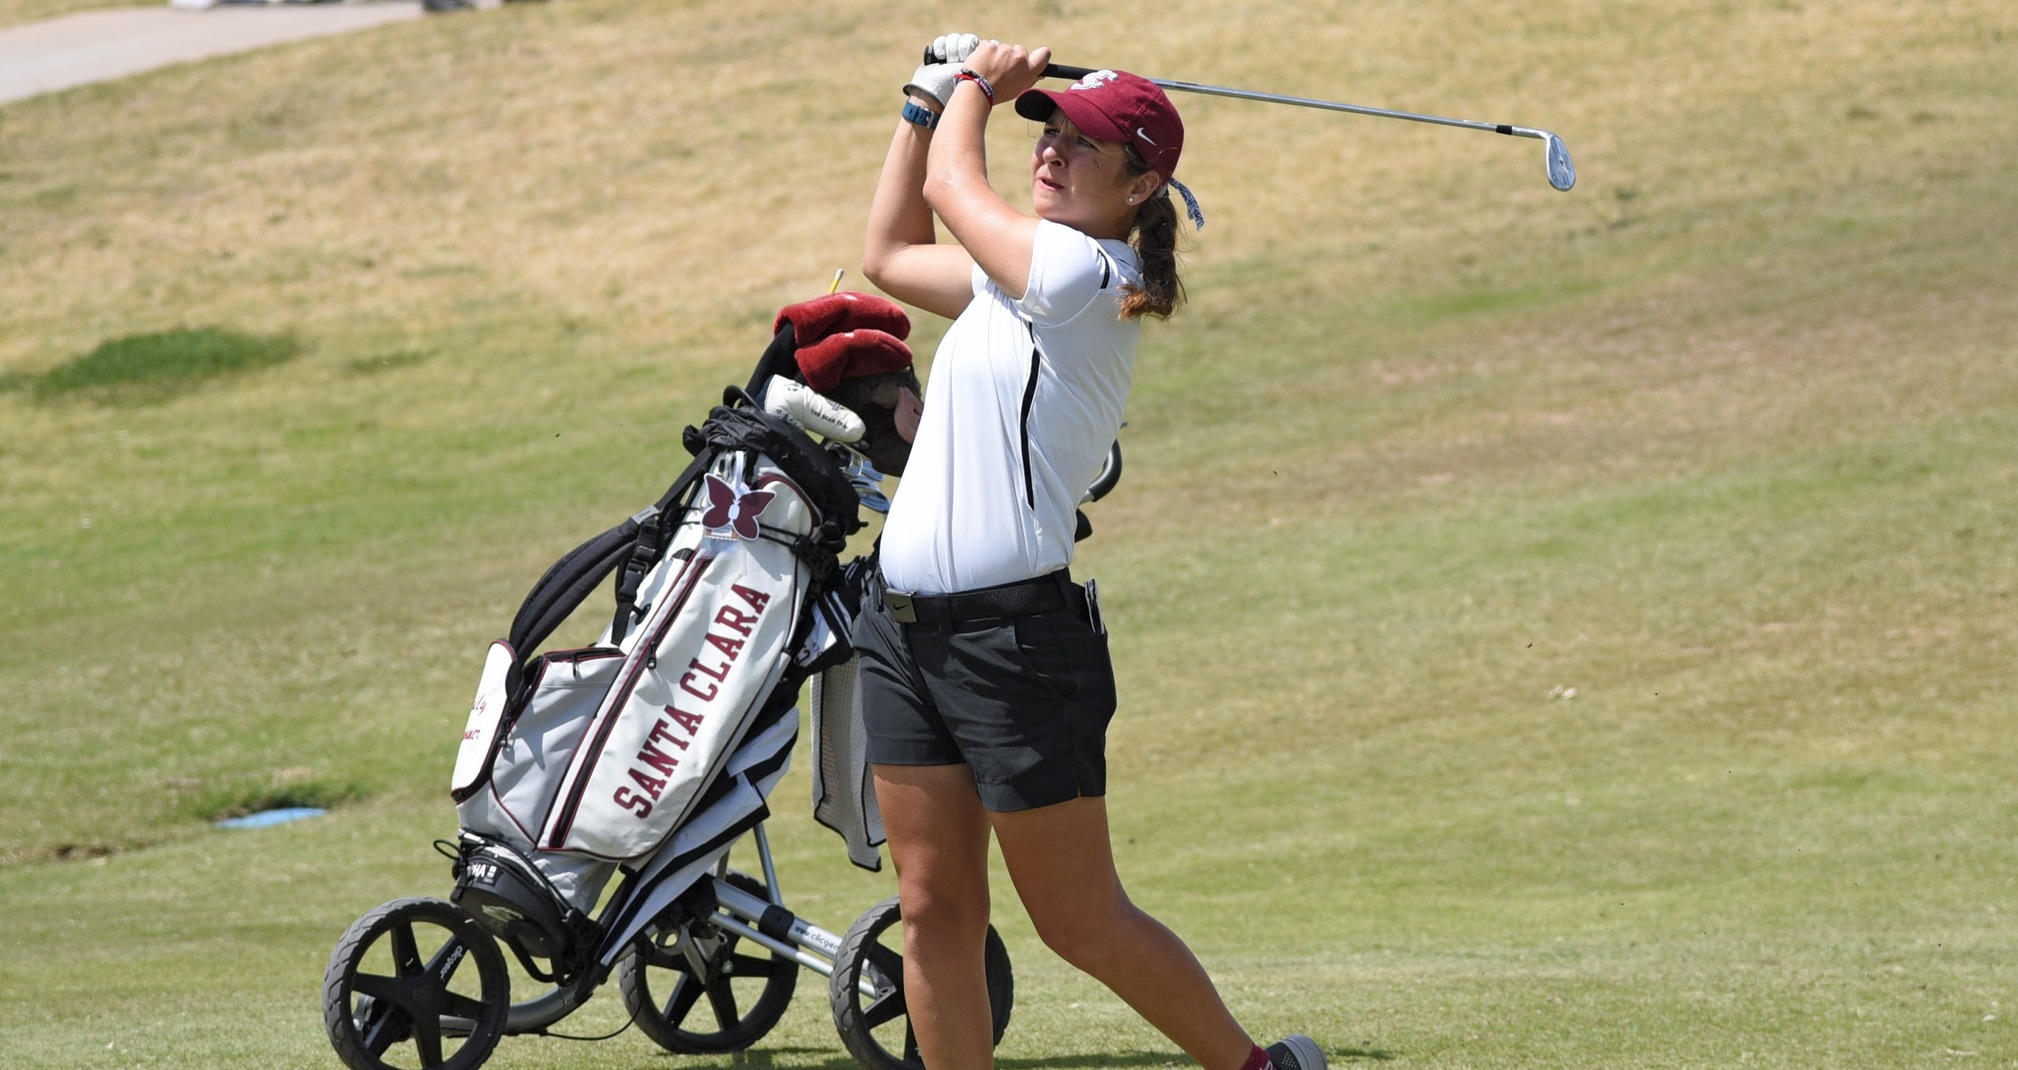 Sumner Gets Top-20; Women’s Golf 13th At BYU Entrada Classic